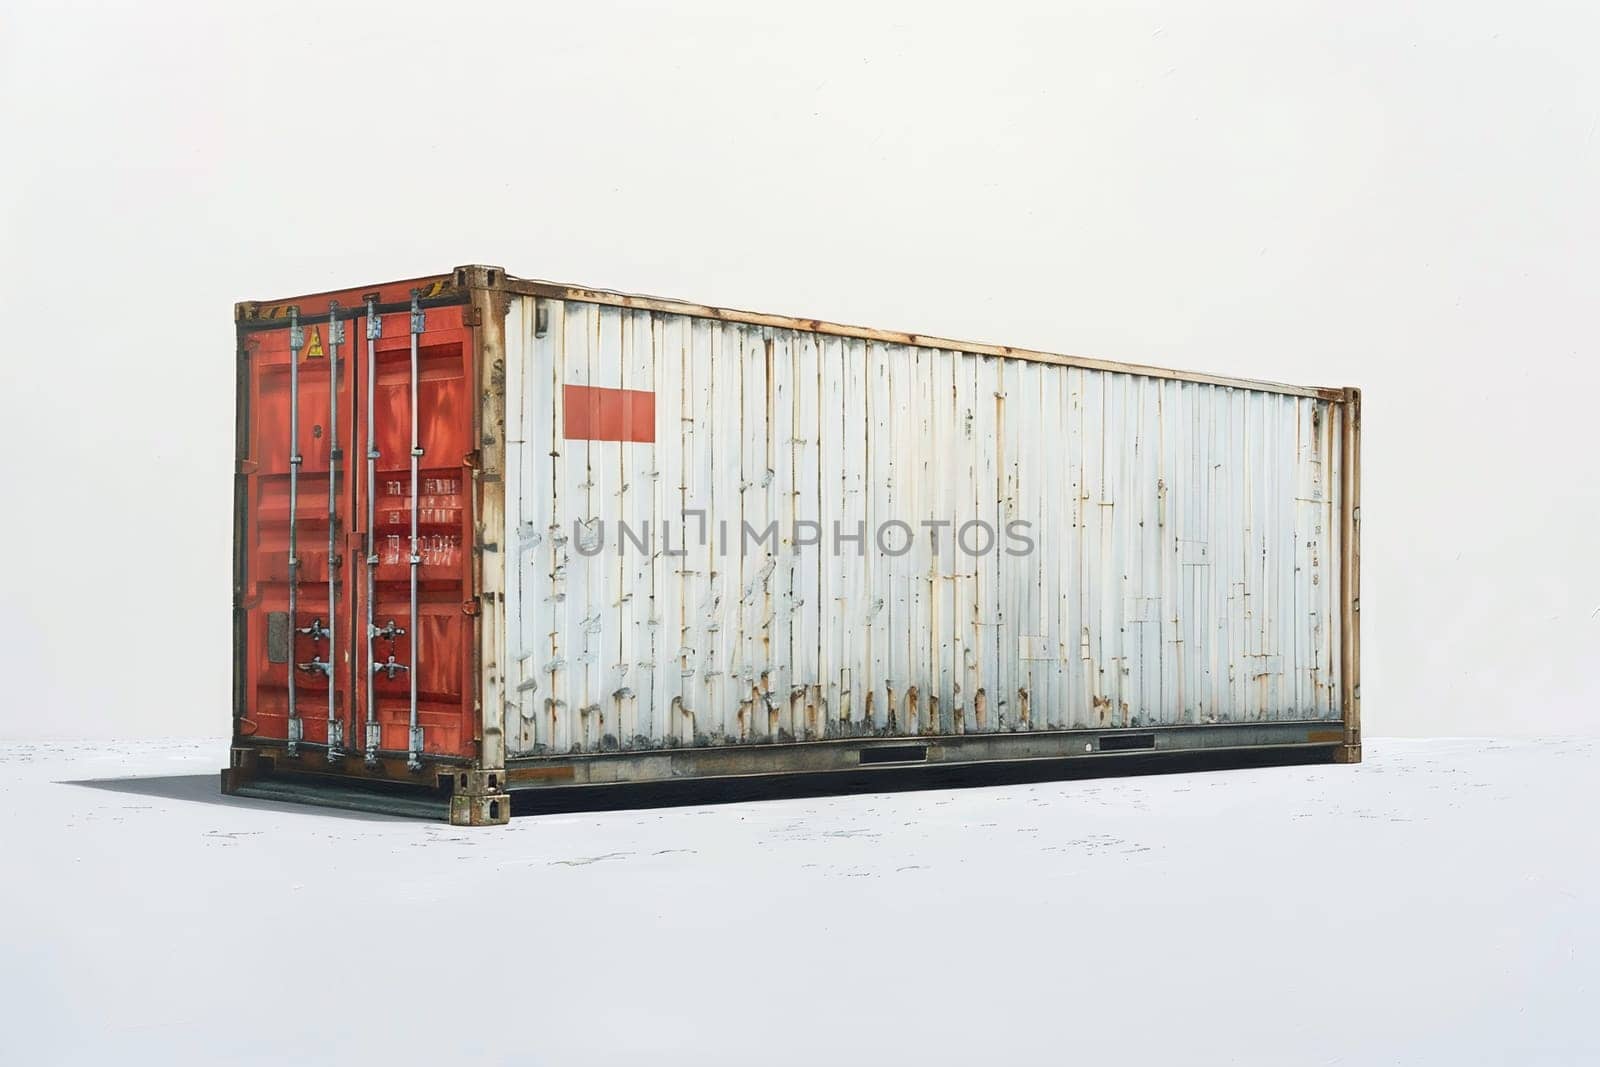 Freight shipping container with flag of china on crane hook - 3D illustration. High quality photo